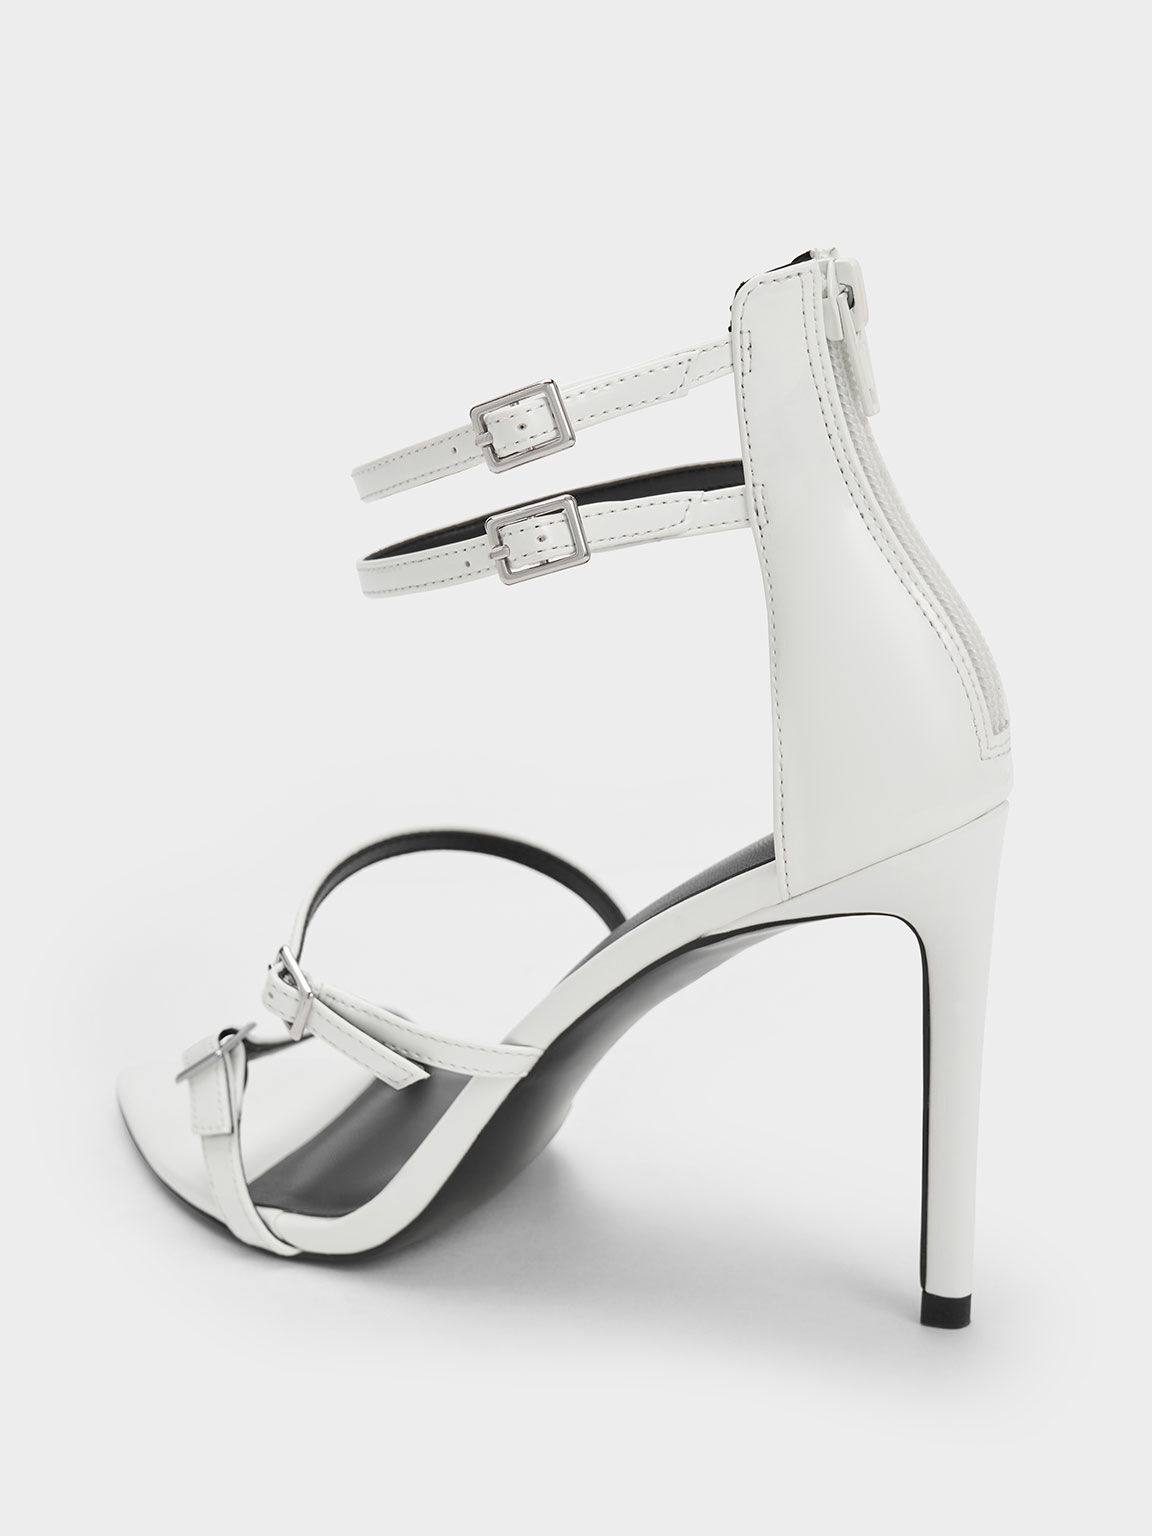 White Patent Strappy Heeled Sandals - CHARLES & KEITH UK